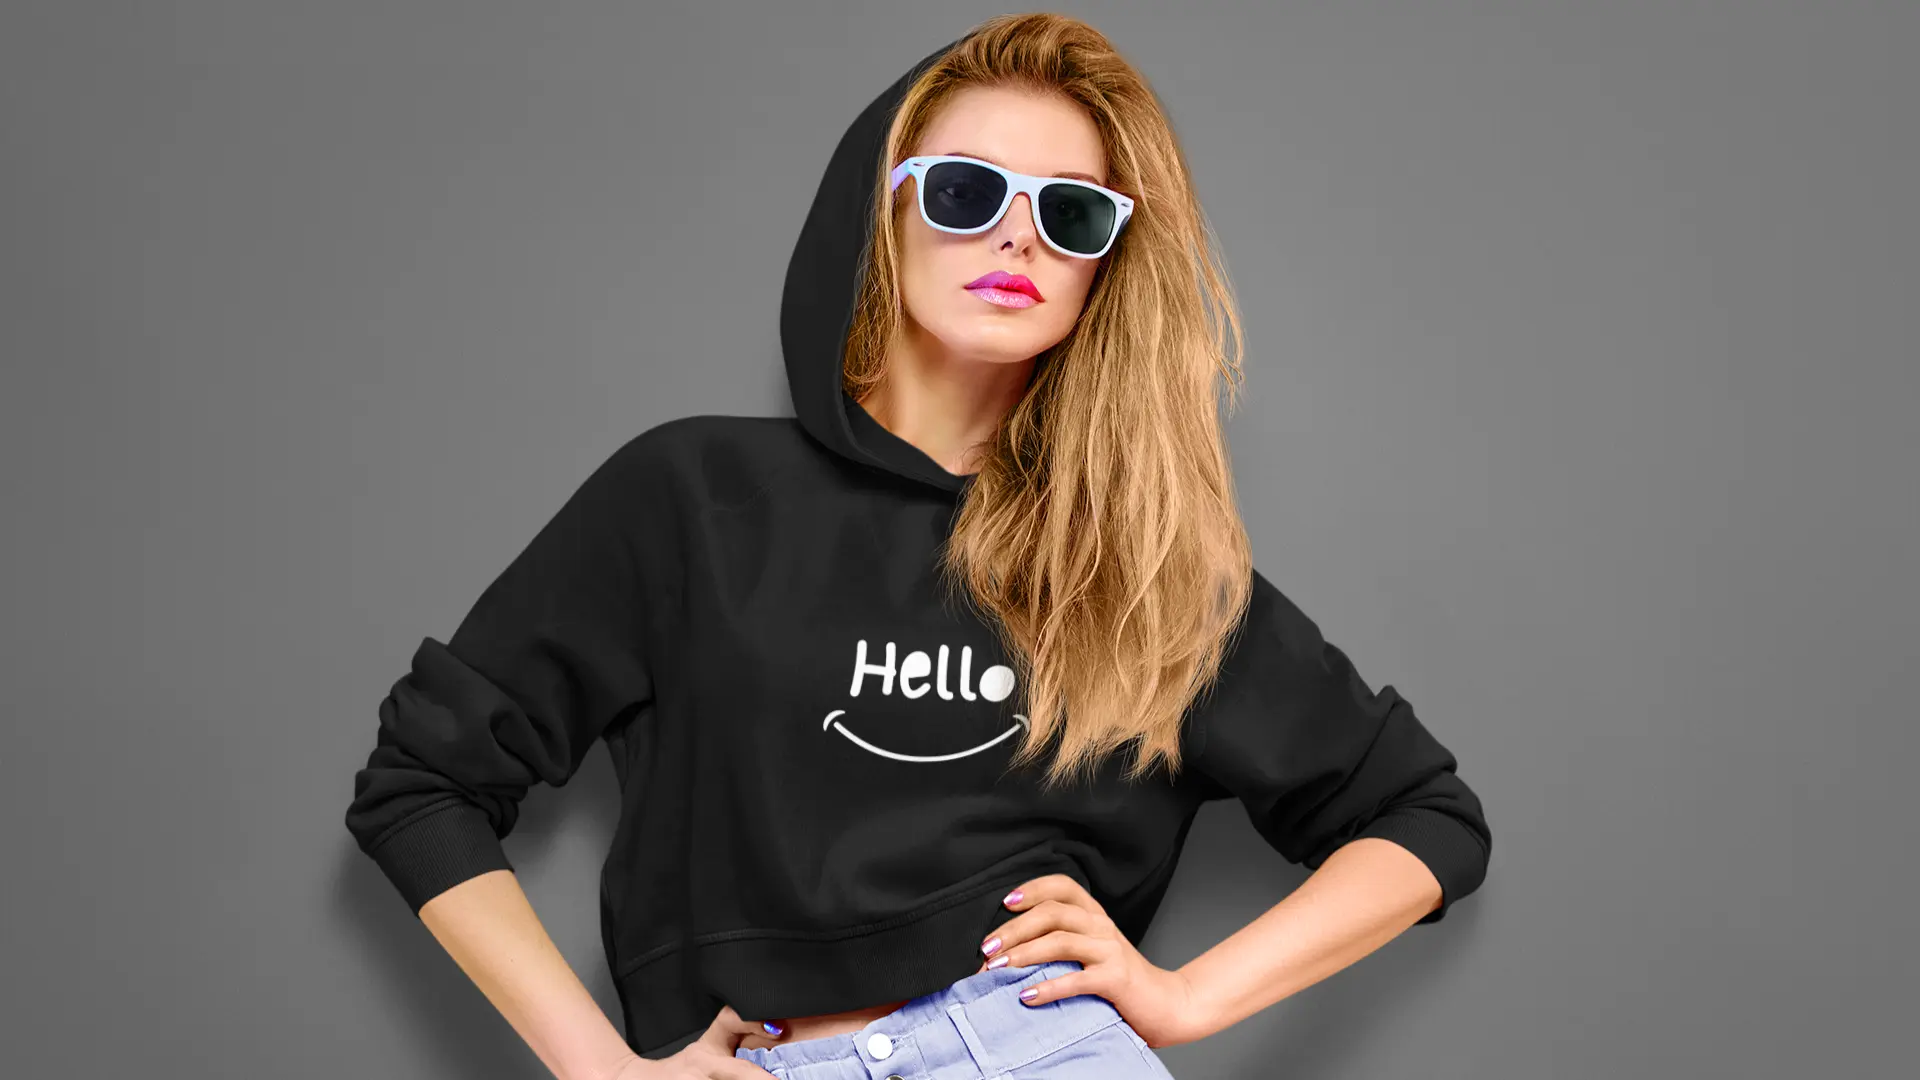 crop-top-hoodie-mockup-featuring-a-serious-woman-with-sunglasses-44681-r-el2